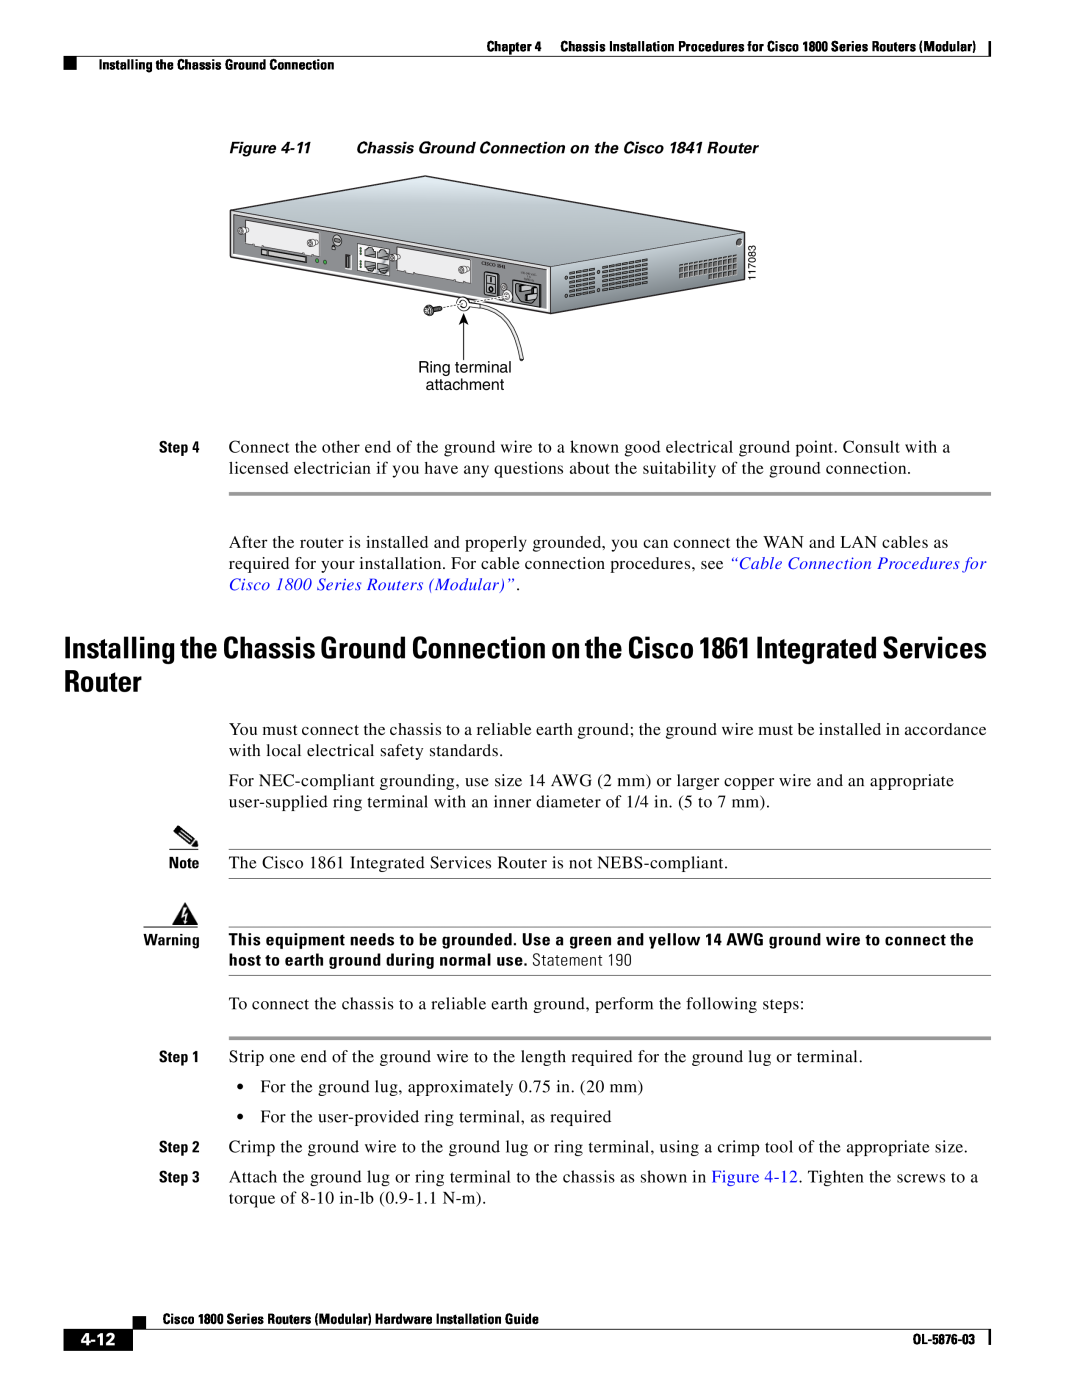 Cisco Systems CISCO1841-HSEC/K9-RF manual 4-12, Note The Cisco 1861 Integrated Services Router is not NEBS-compliant 